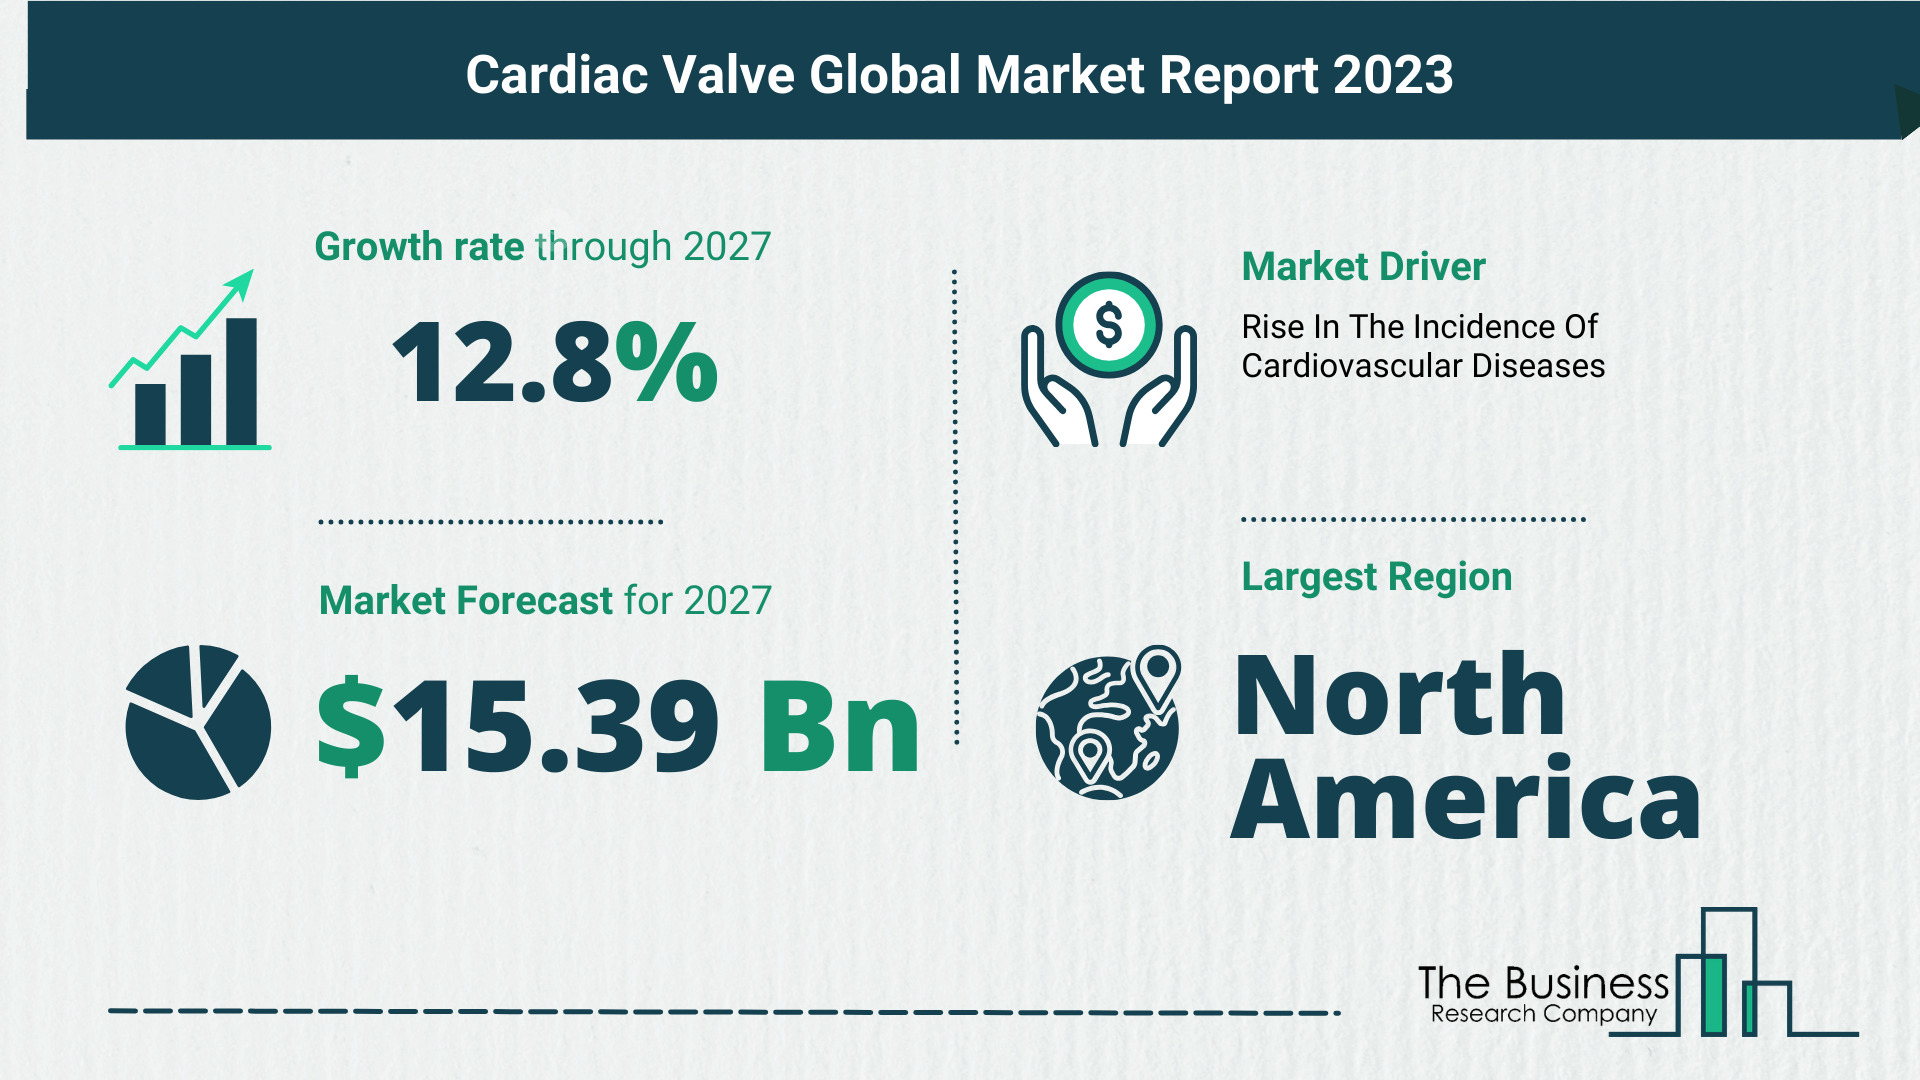 Key Trends And Drivers In The Cardiac Valve Market 2023